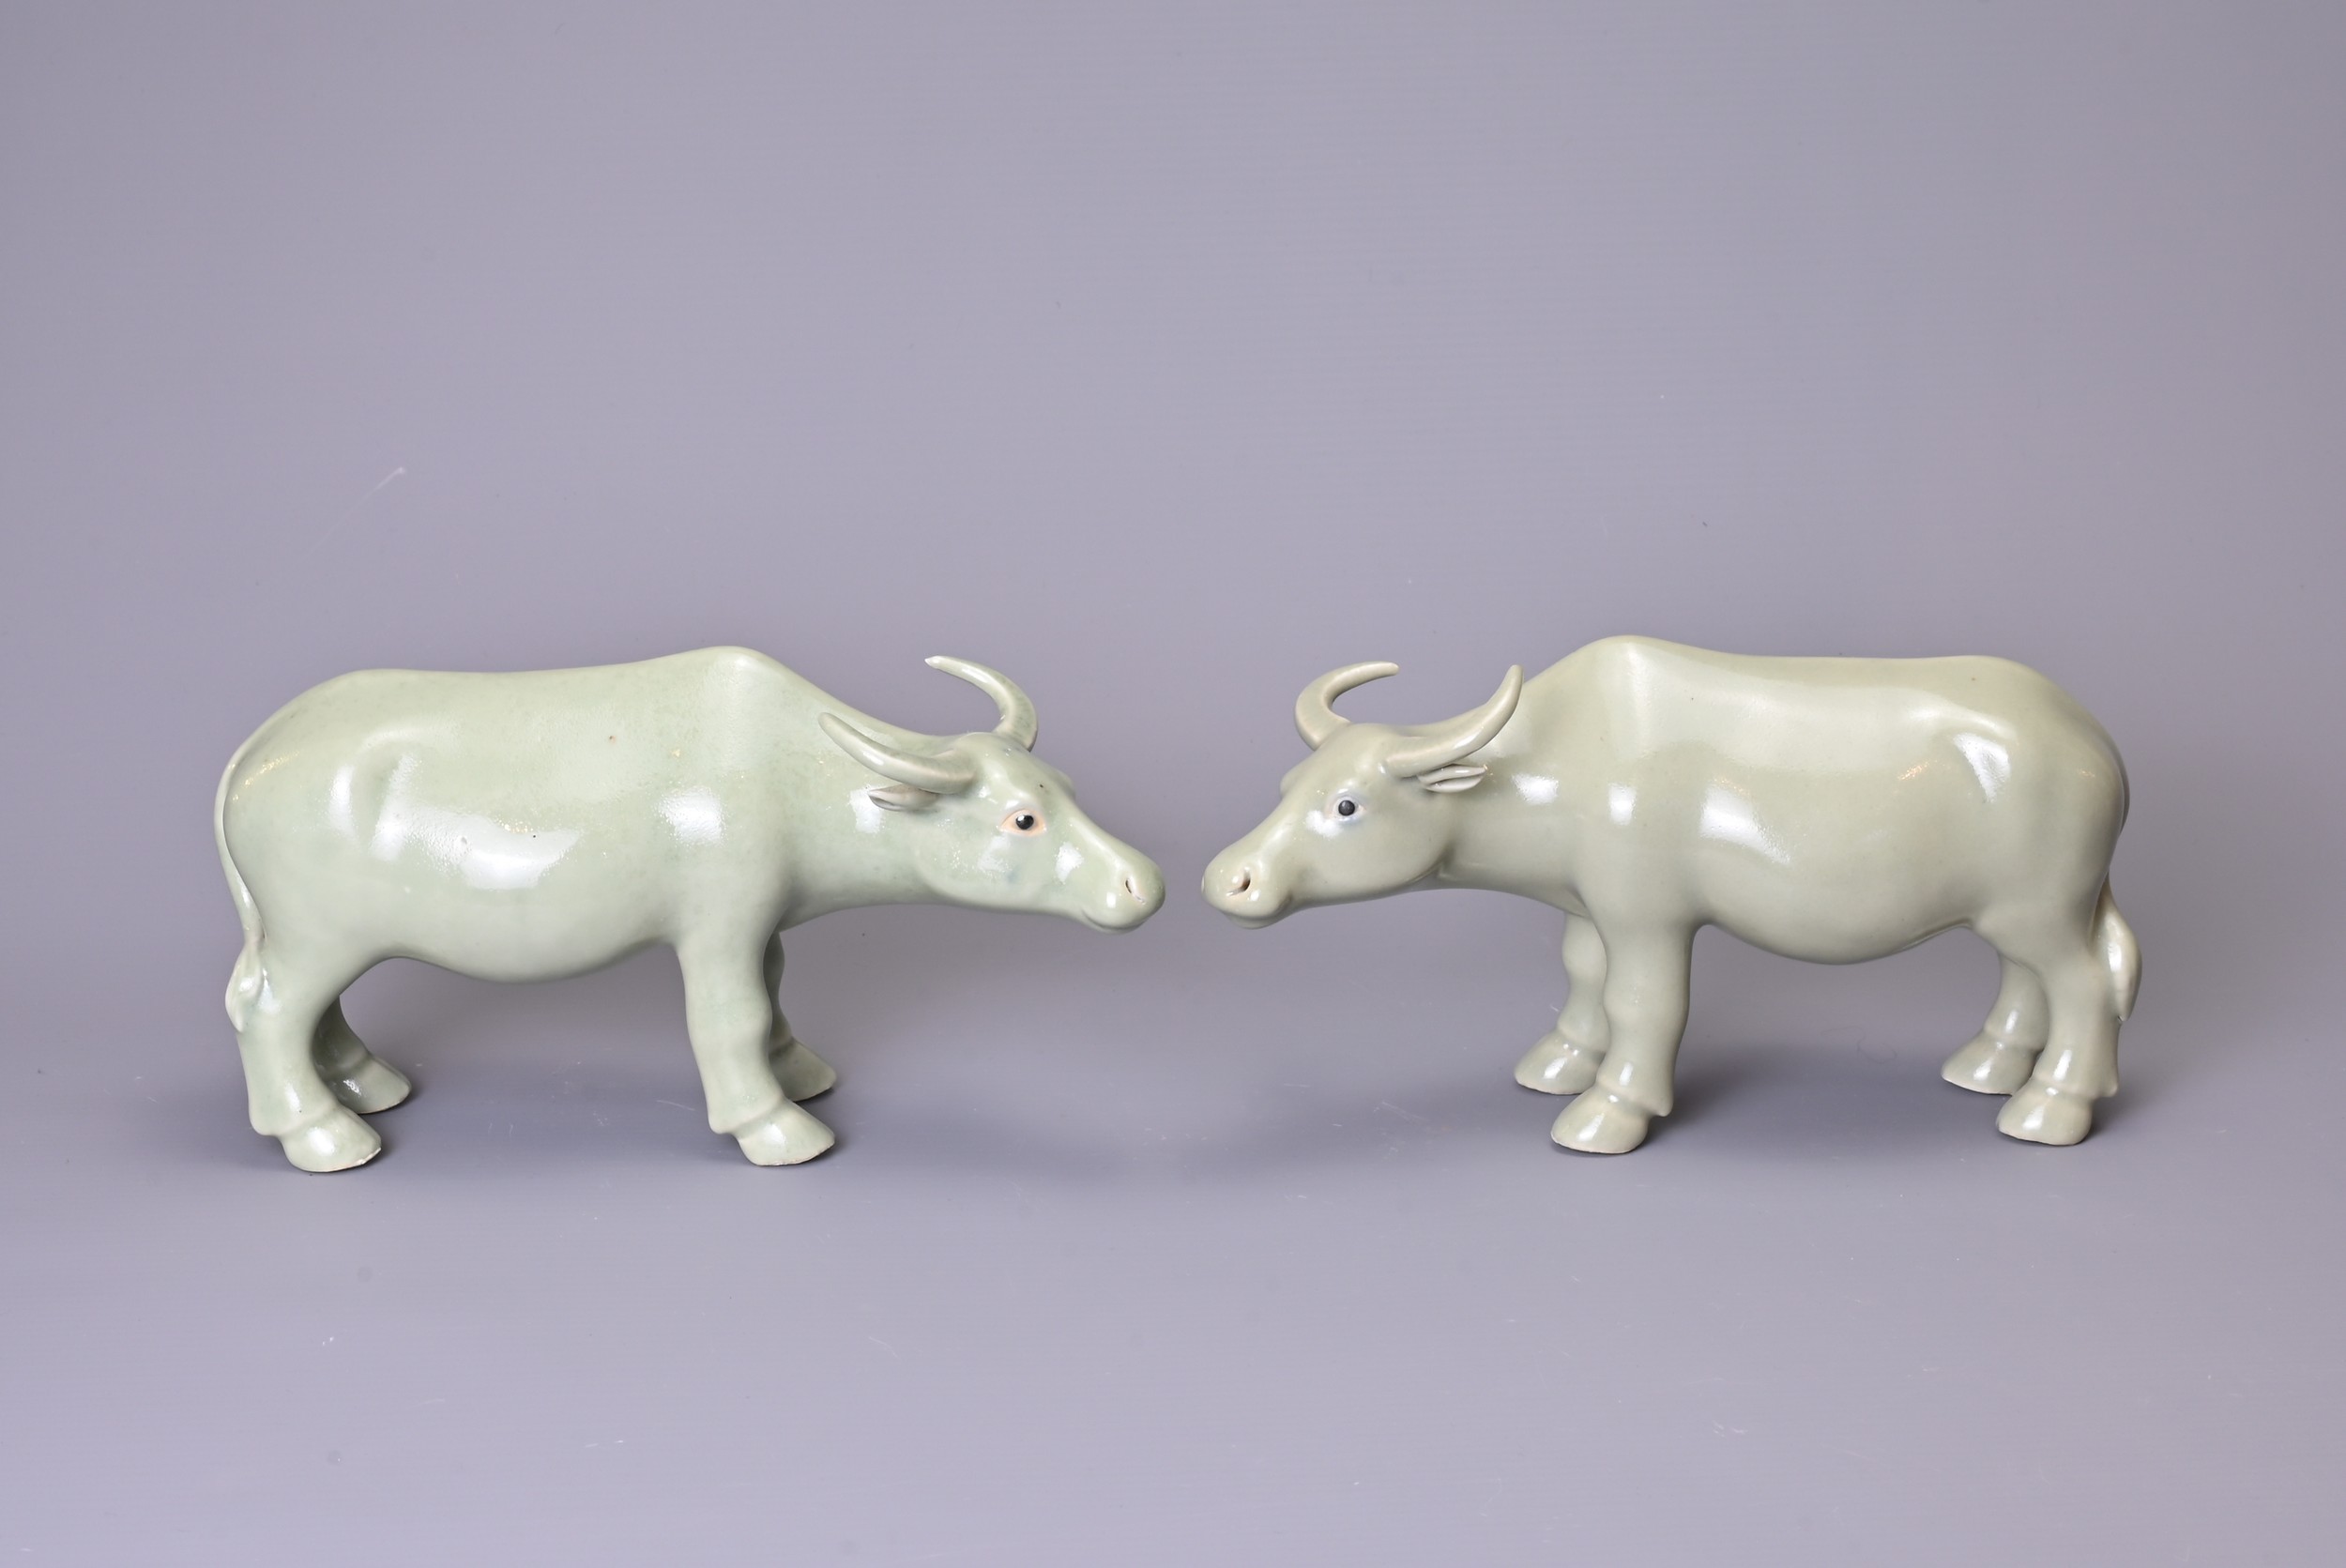 A PAIR OF CHINESE CELADON GLAZED PORCELAIN MODELS OF OX, 20th Century, approx. 21 cm long (2)